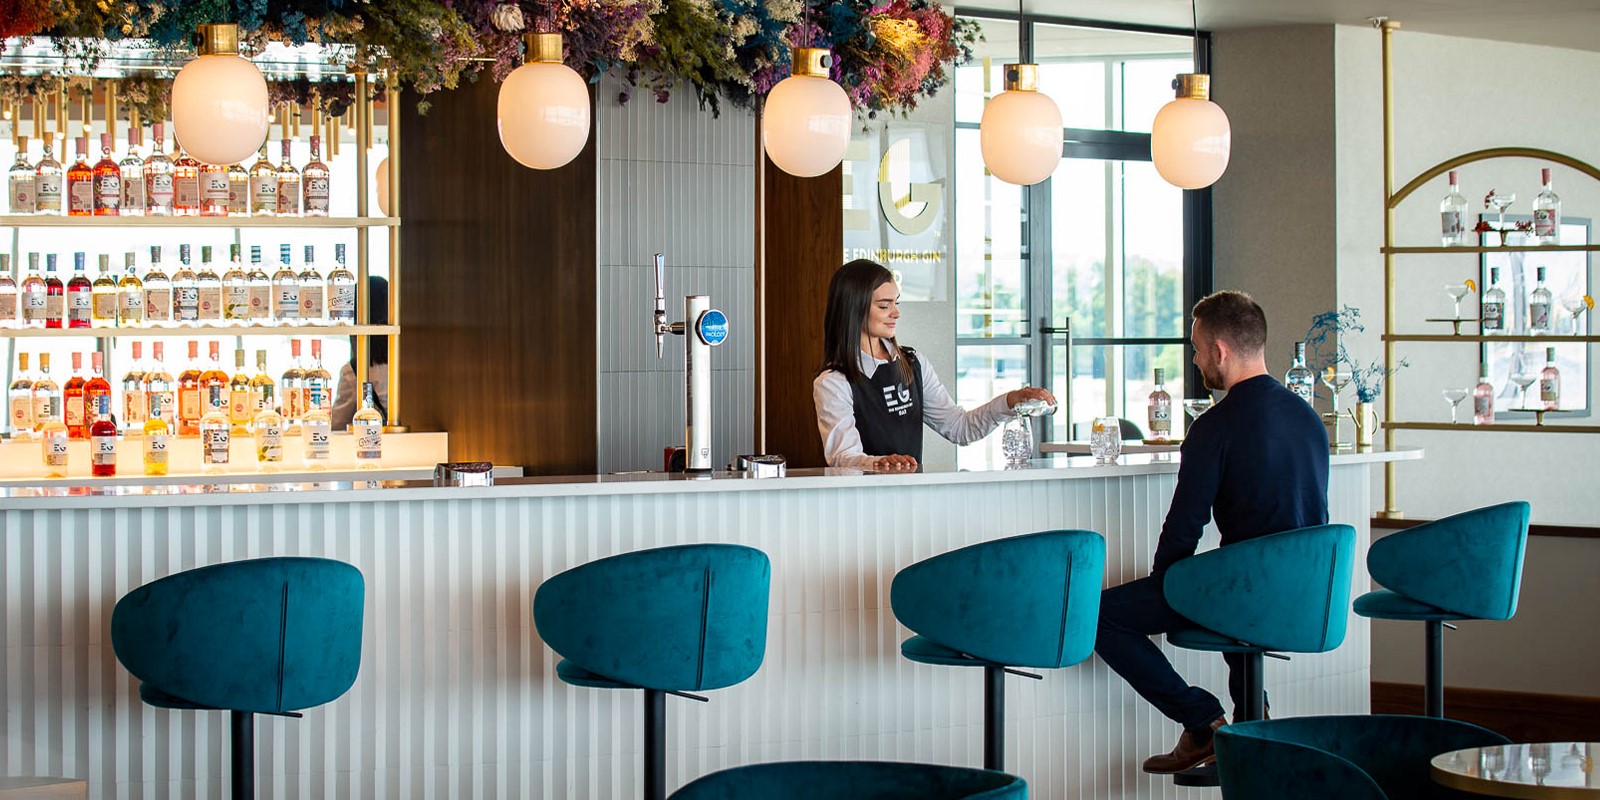 bar area showing a person pouring a drink with a person sitting.